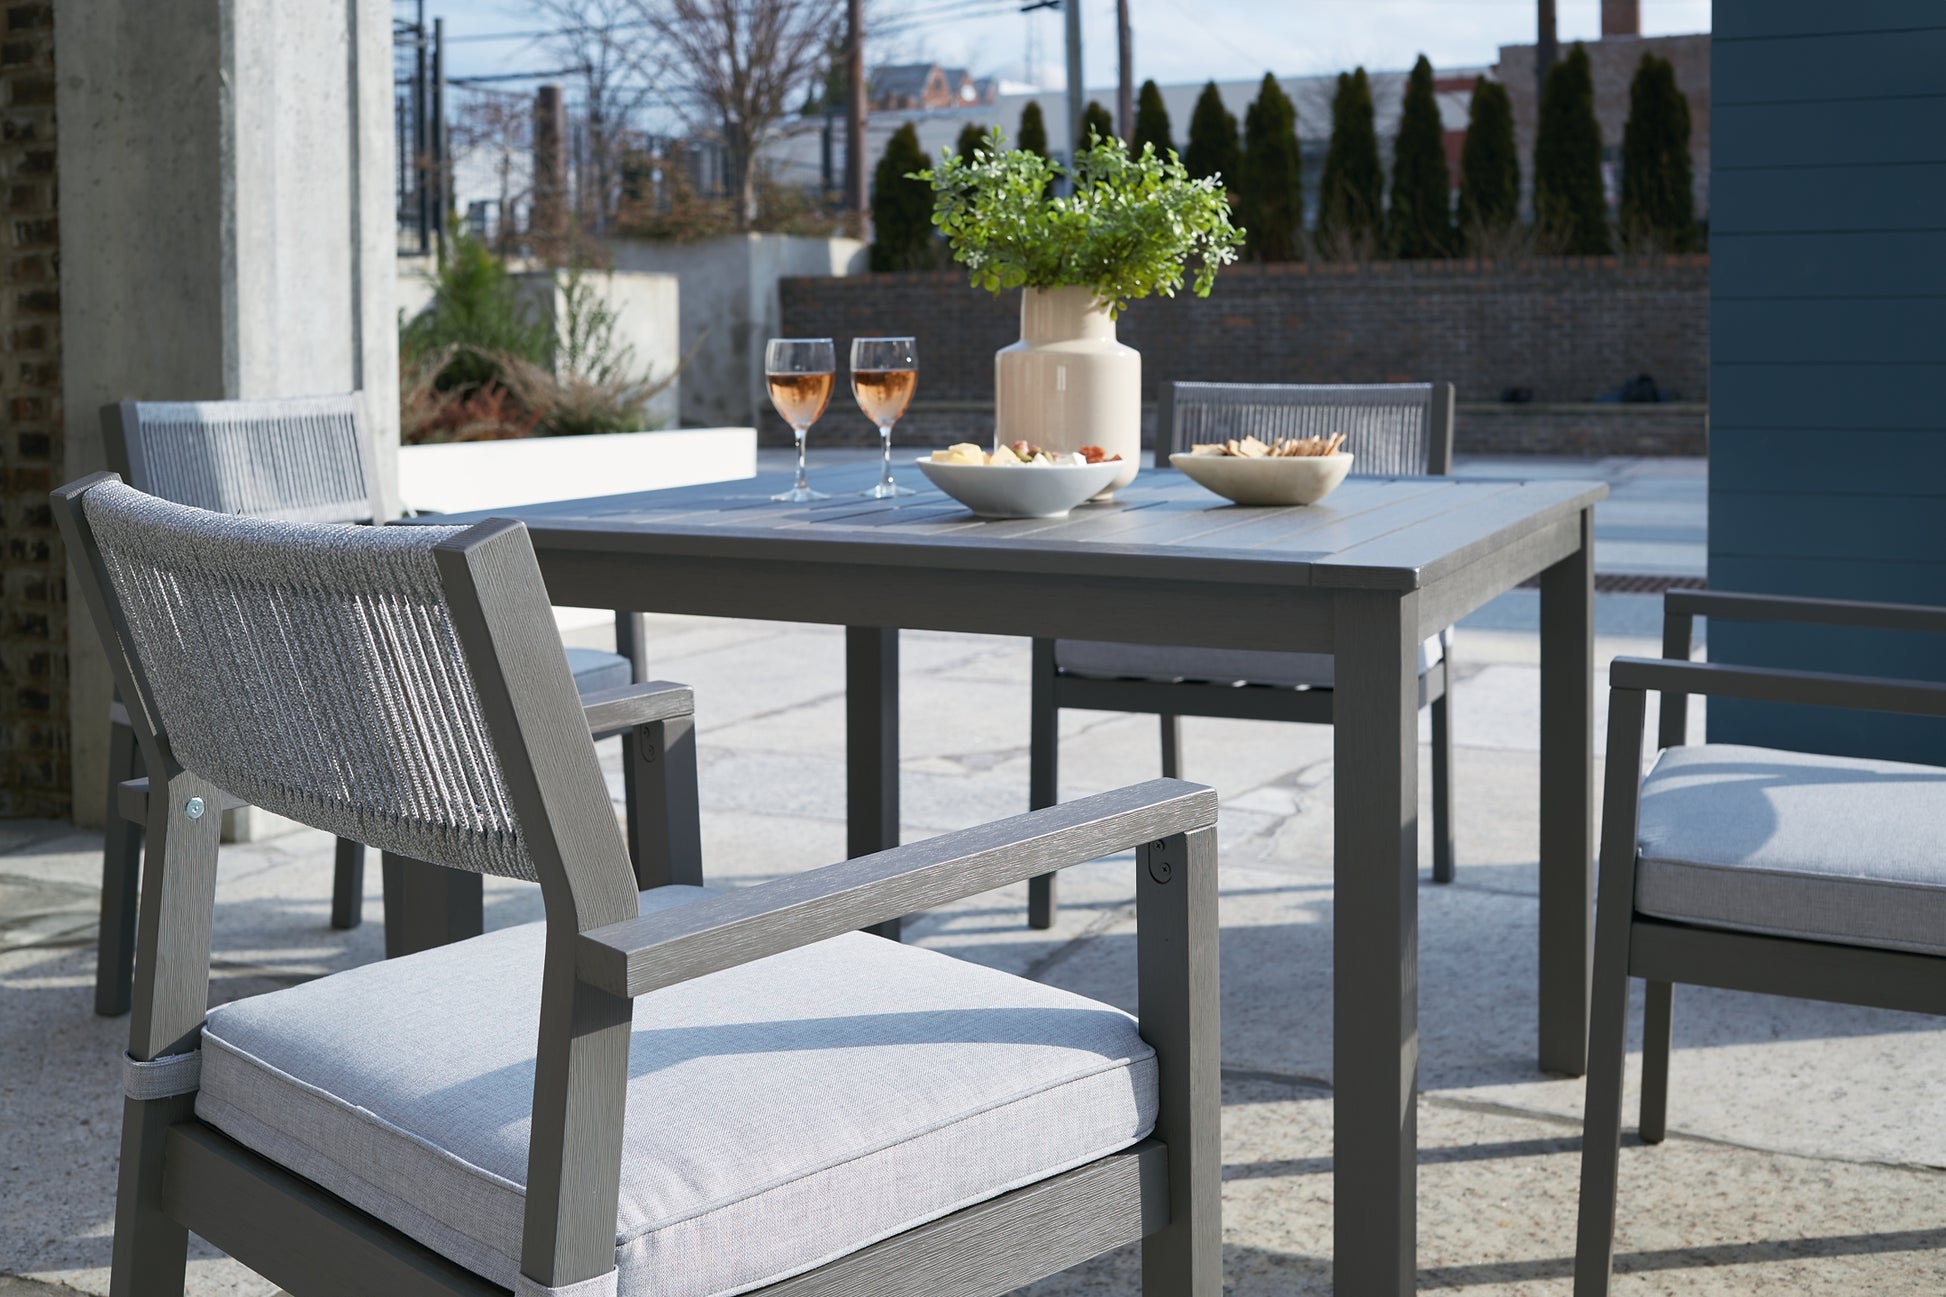 Eden Town Outdoor Dining Table and 4 Chairs Wilson Furniture (OH)  in Bridgeport, Ohio. Serving Bridgeport, Yorkville, Bellaire, & Avondale